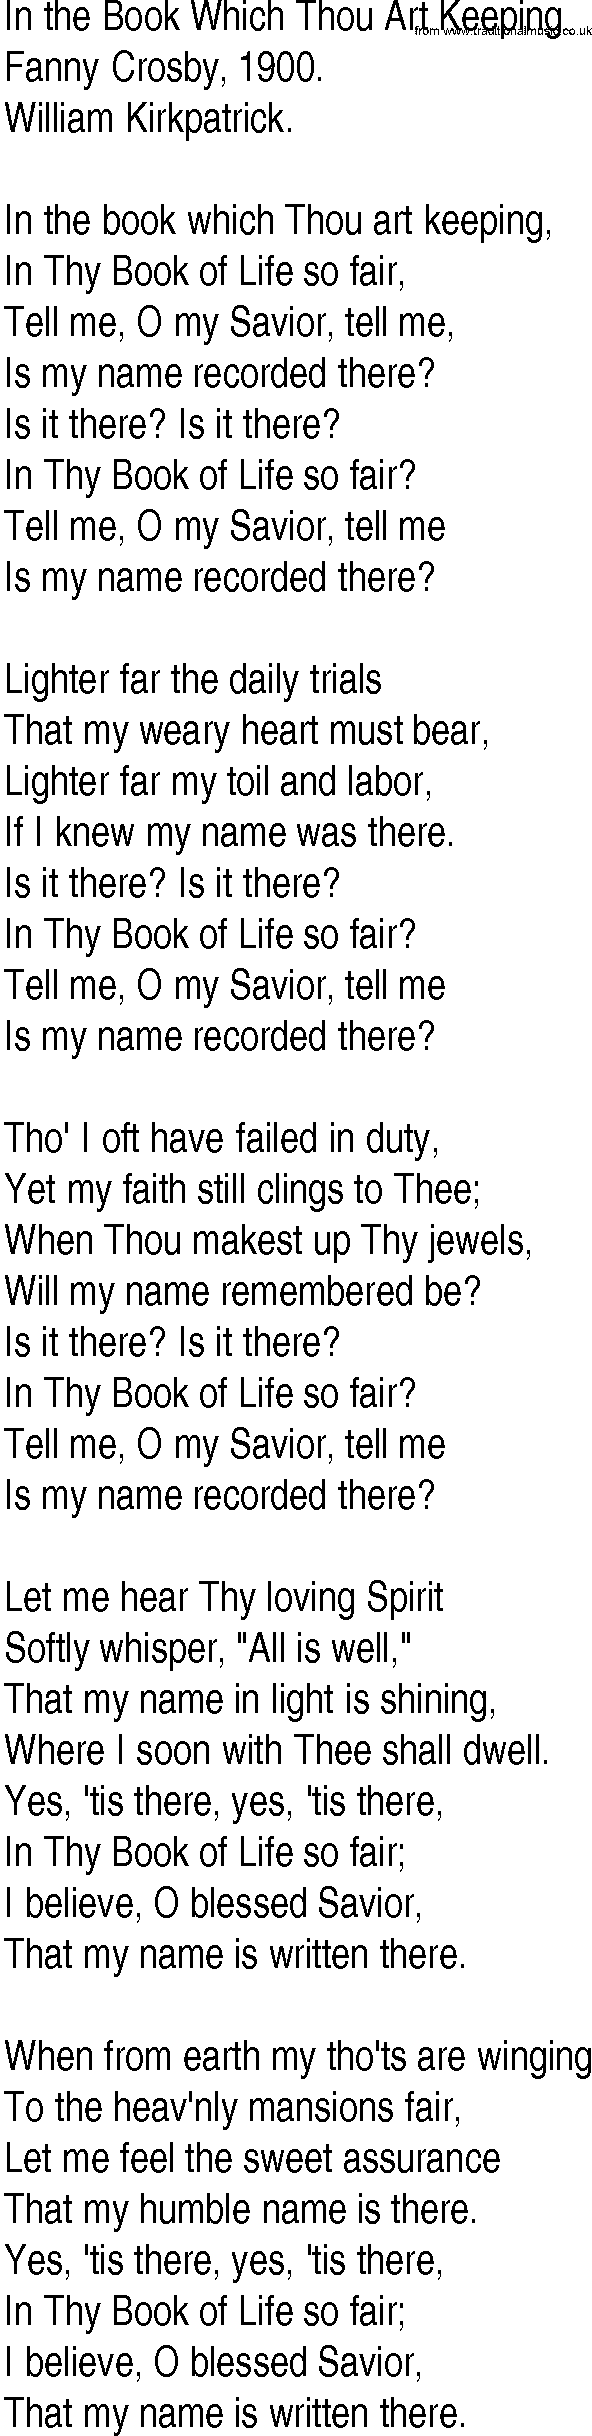 Hymn and Gospel Song: In the Book Which Thou Art Keeping by Fanny Crosby lyrics